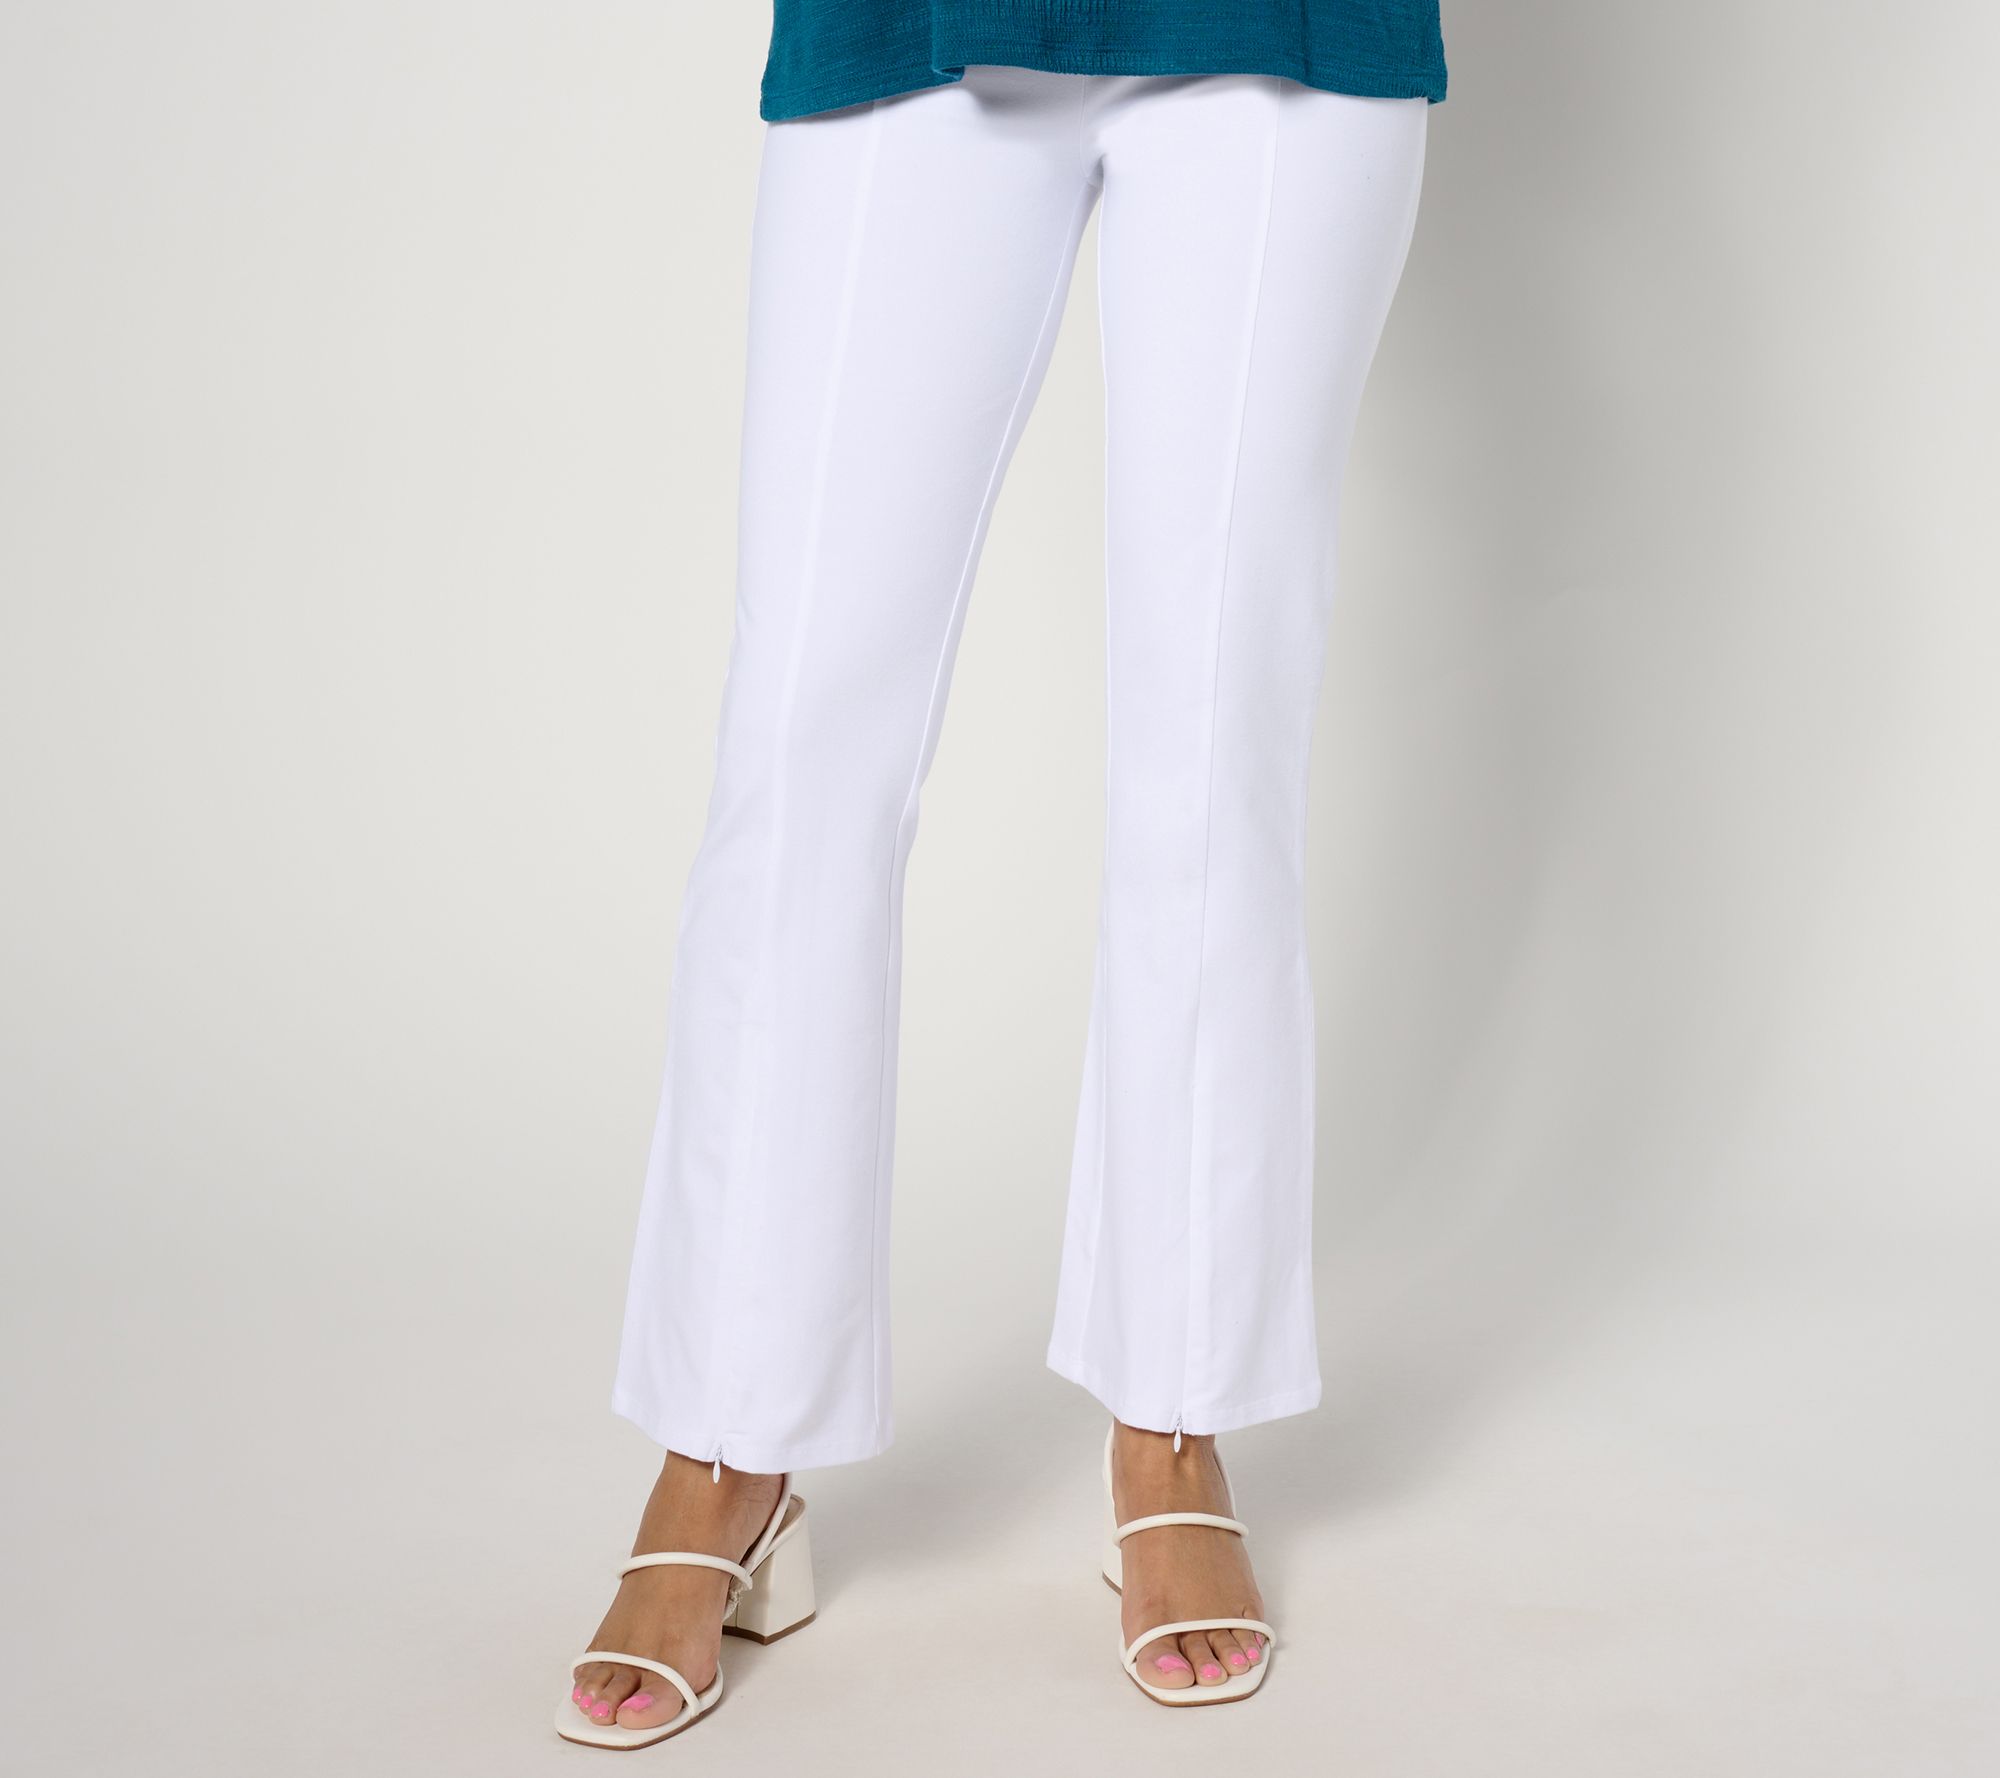 Spanx Cropped Flare Ponte Pant on QVC 